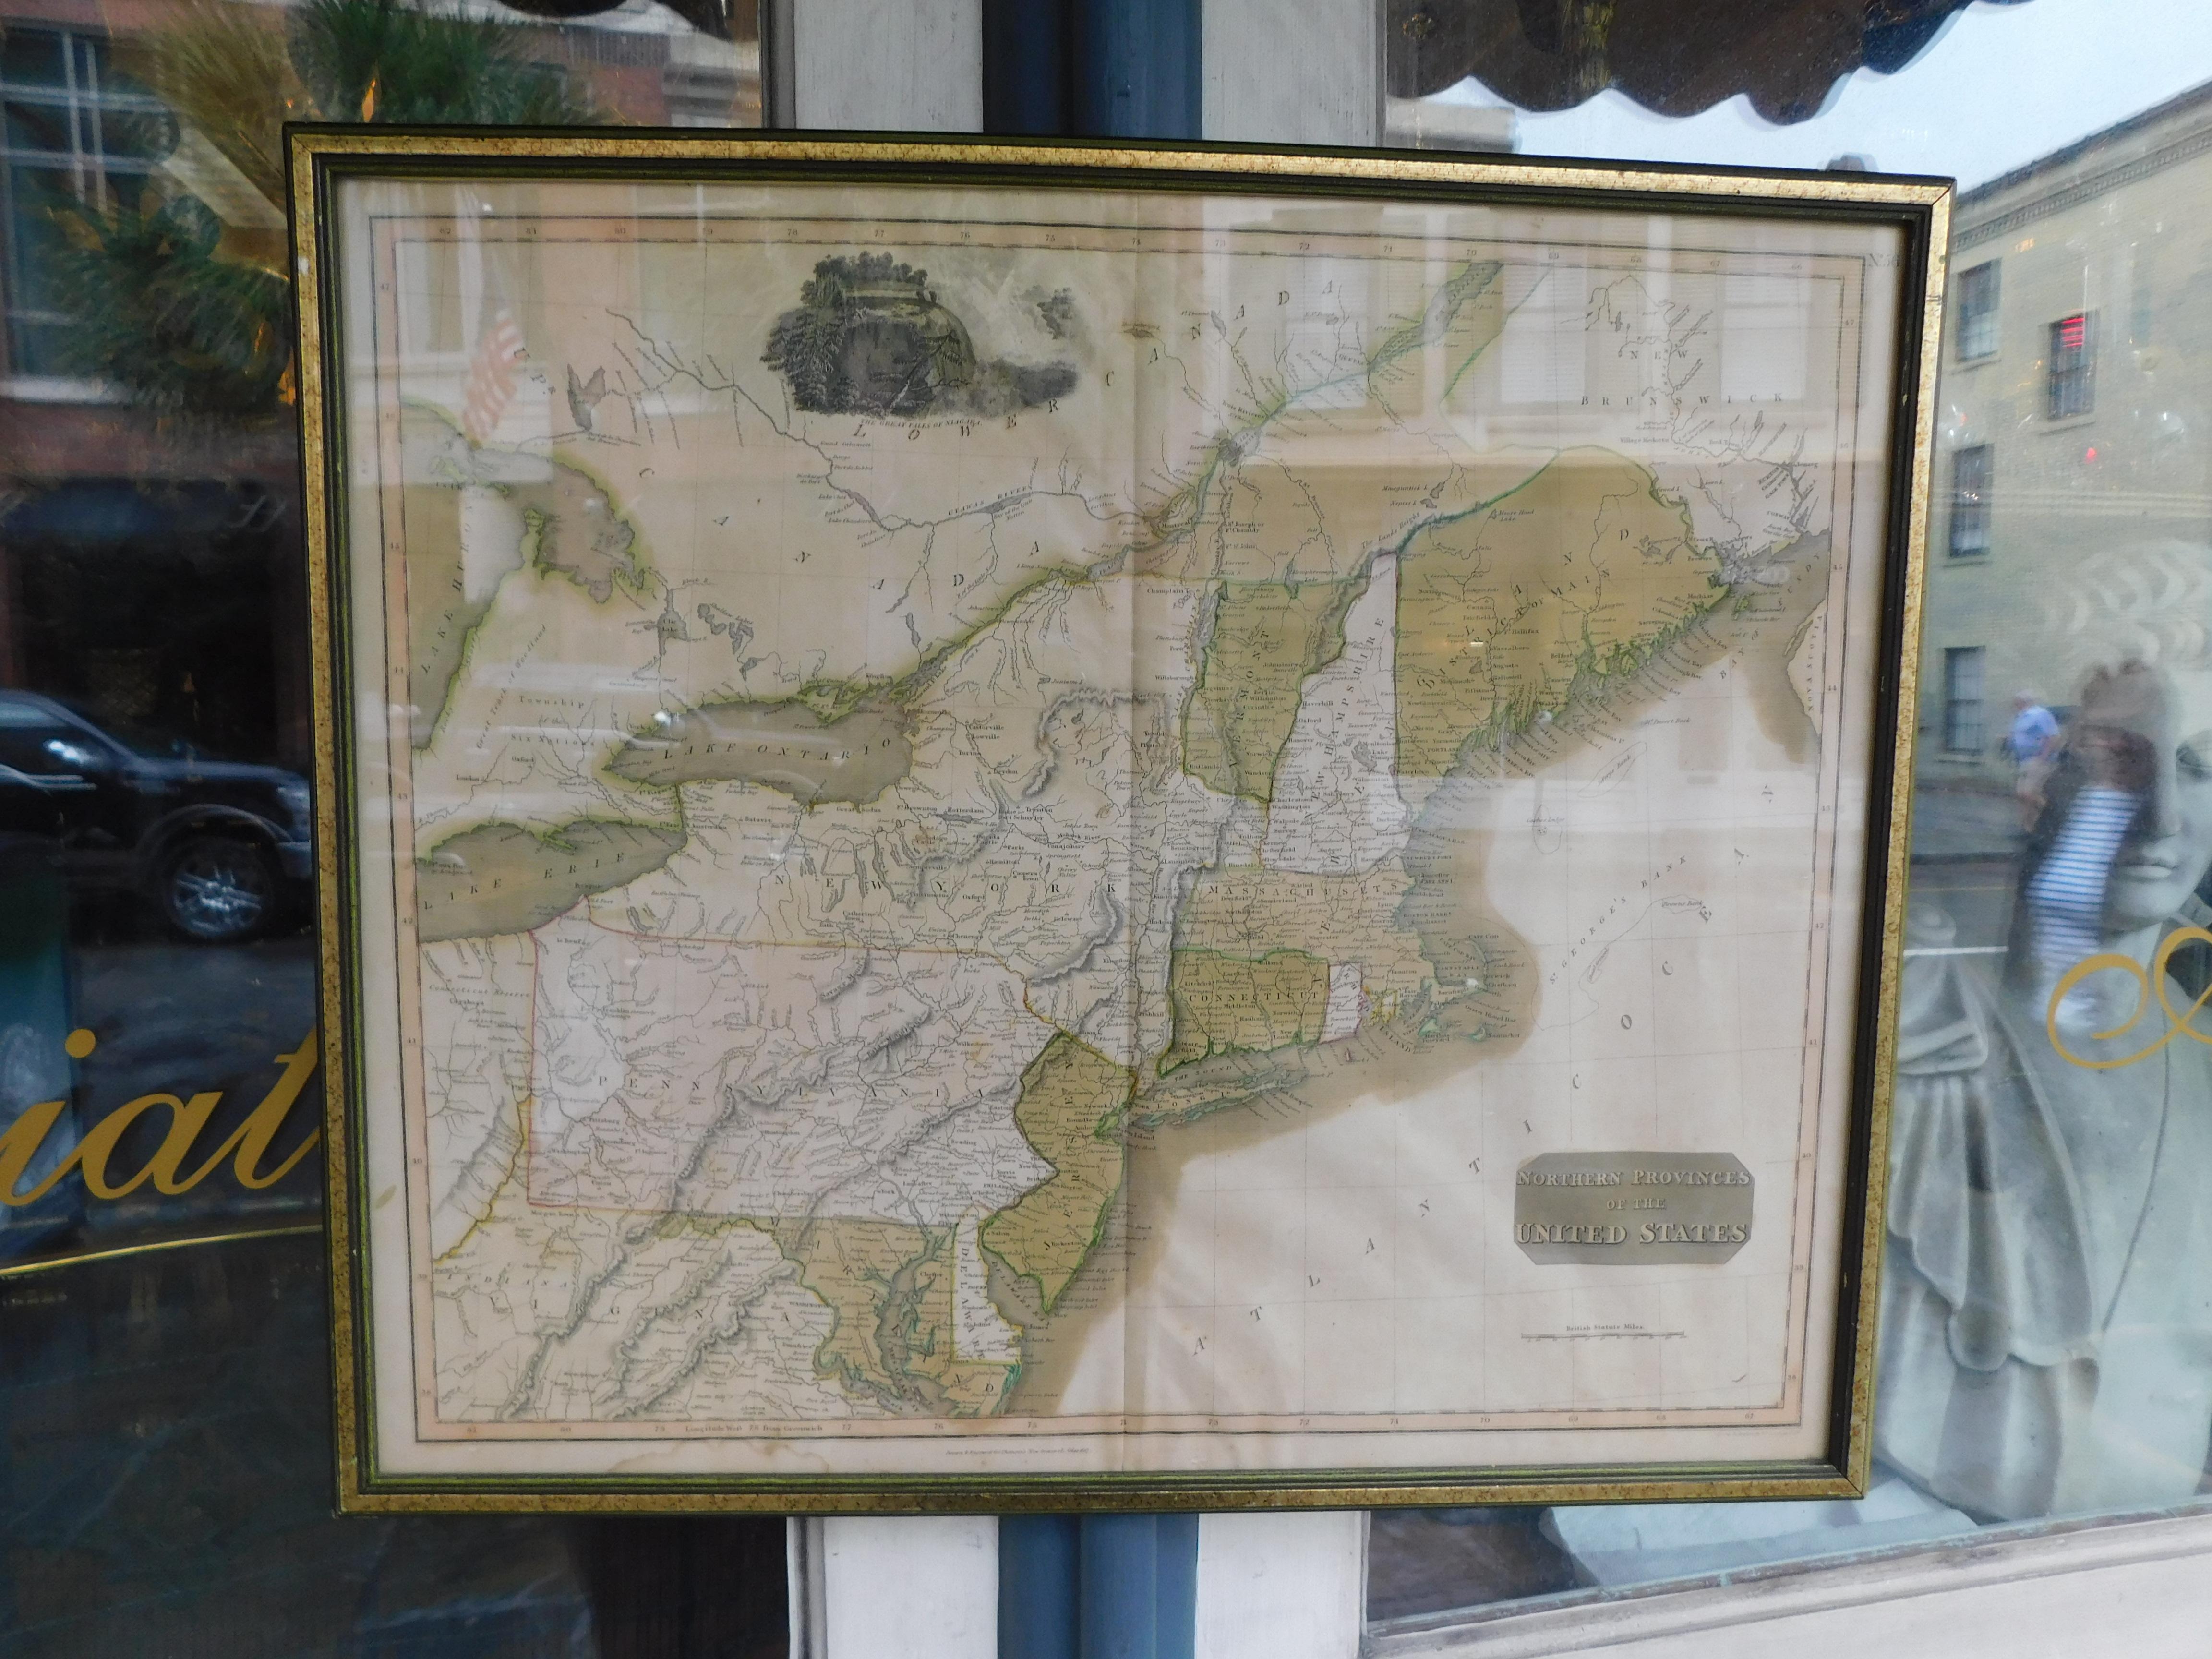 English copper engraved hand colored map of the North Eastern United States matted under glass in a gilt frame, Early 19th Century. Drawn and Engraved for Thomson's New General Atlas, 1817.